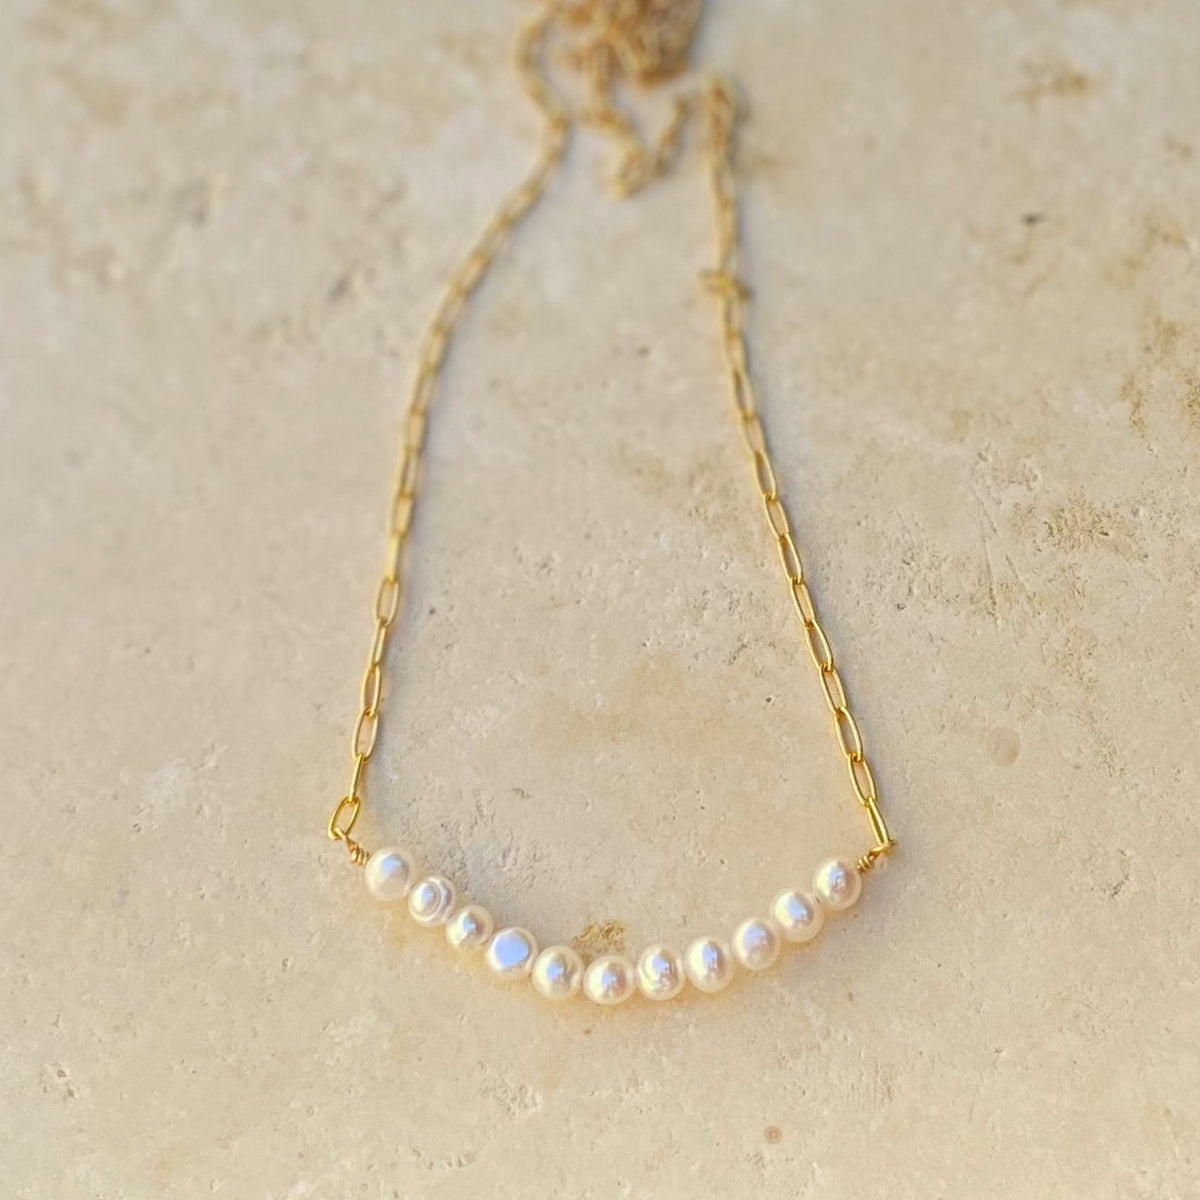 Gold Necklace with Small Pearl Cluster